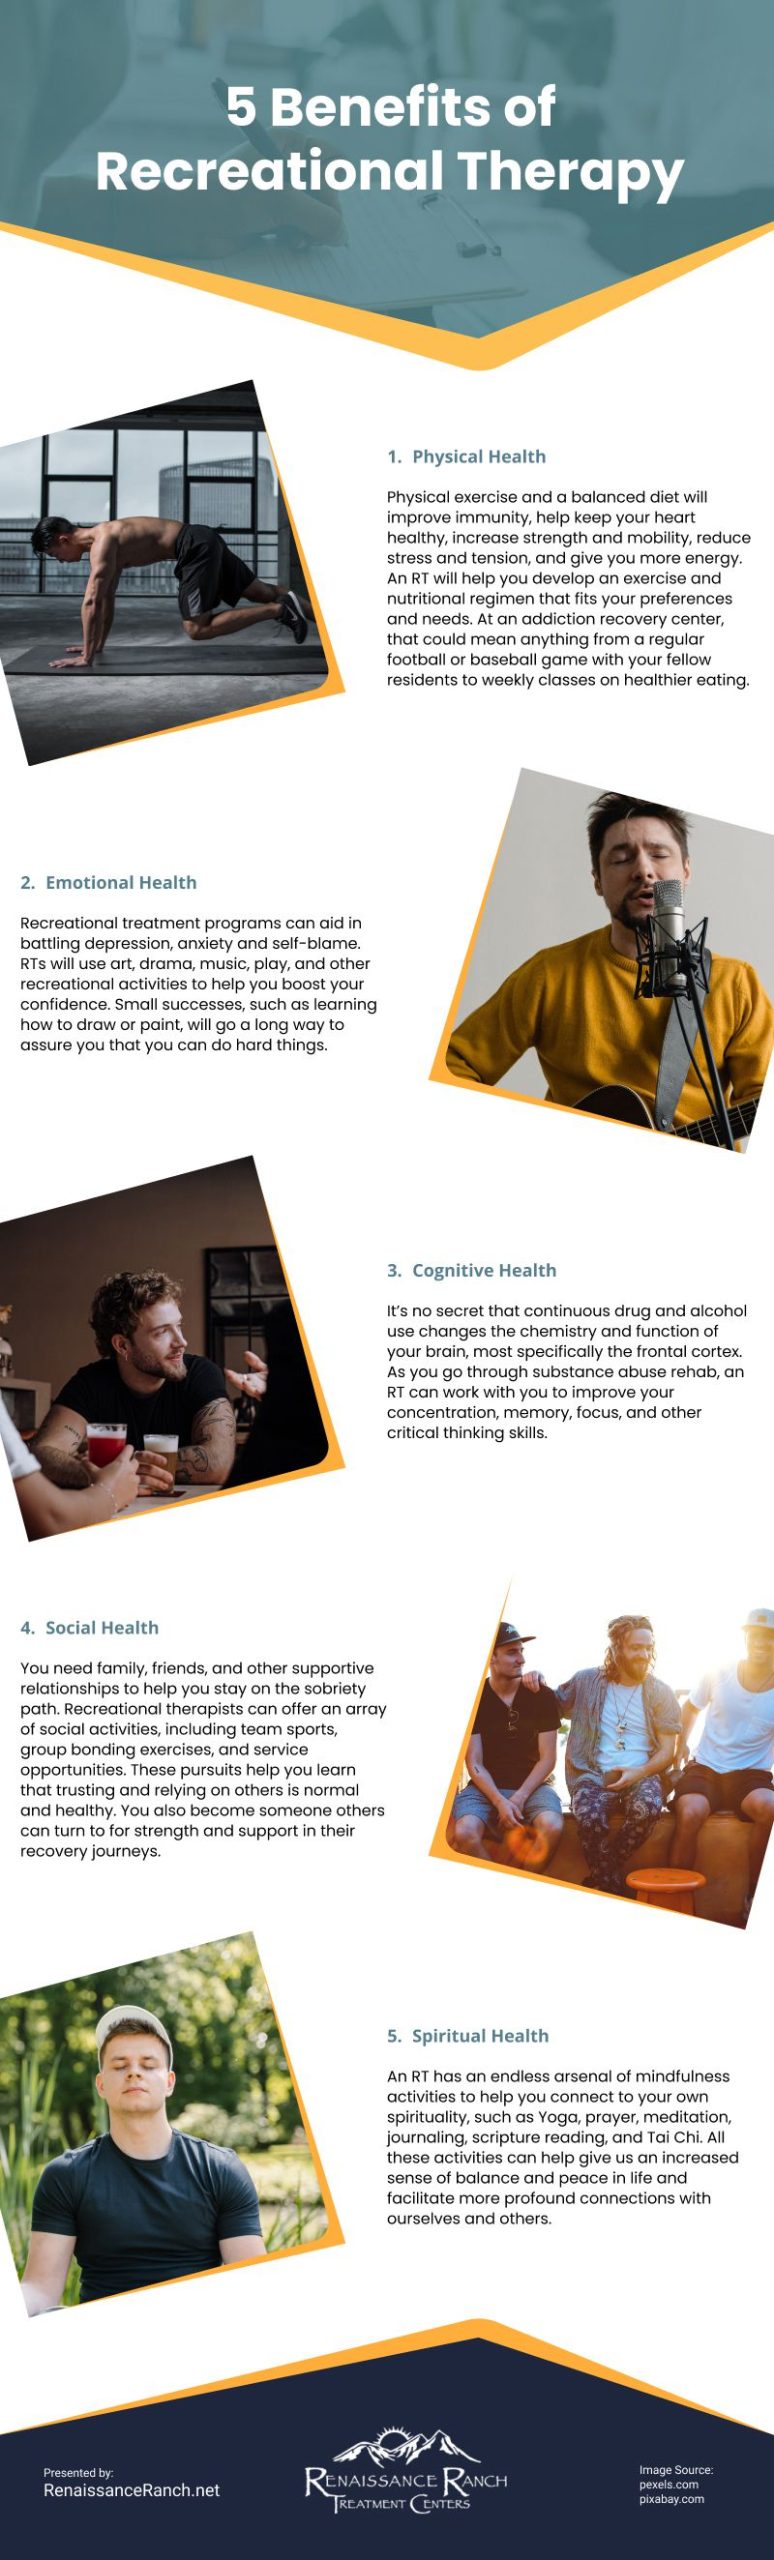 5 Benefits of Recreational Therapy Infographic